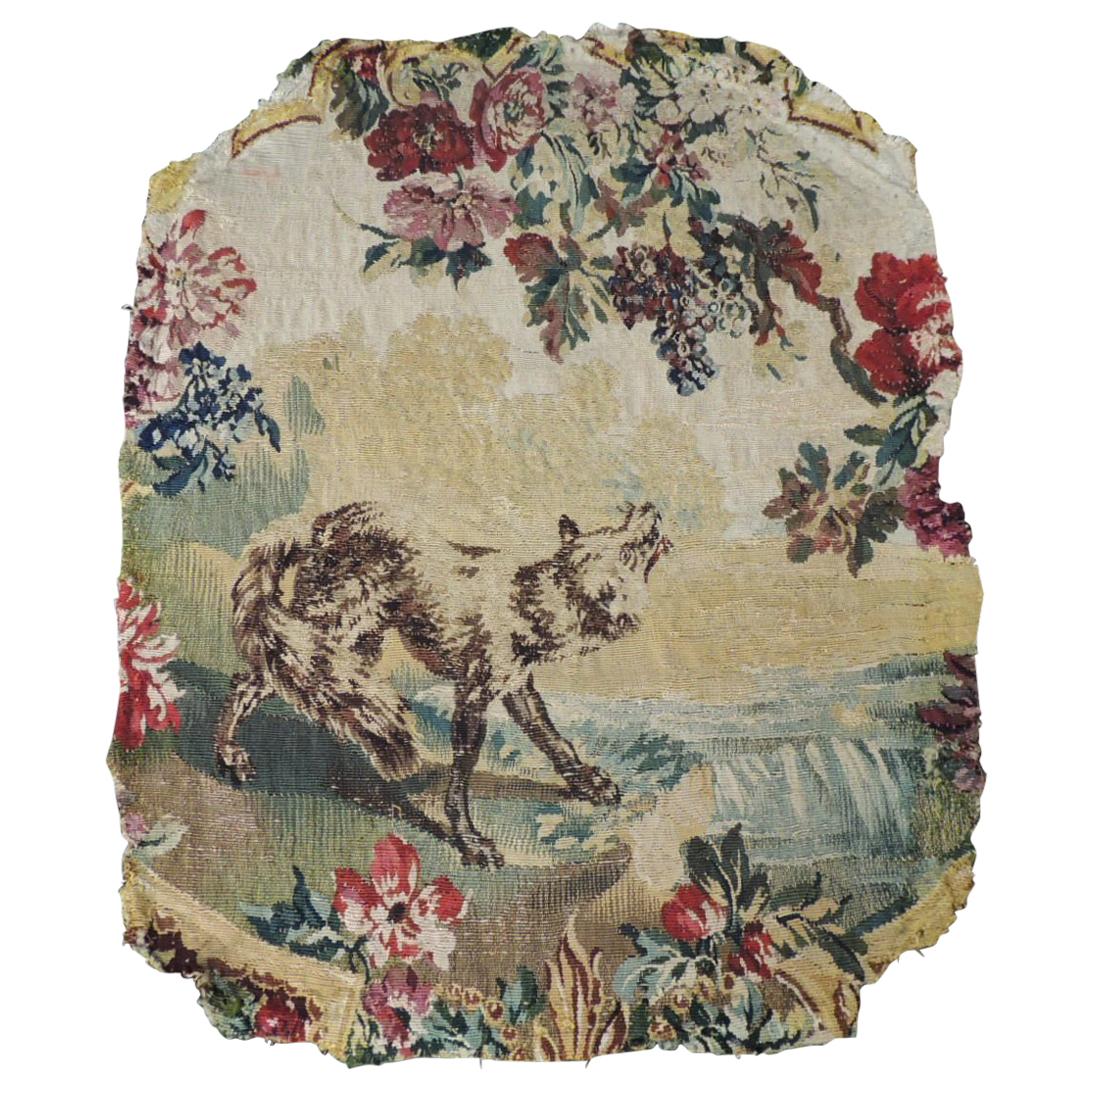 Antique Aubusson Oval Tapestry Fragment